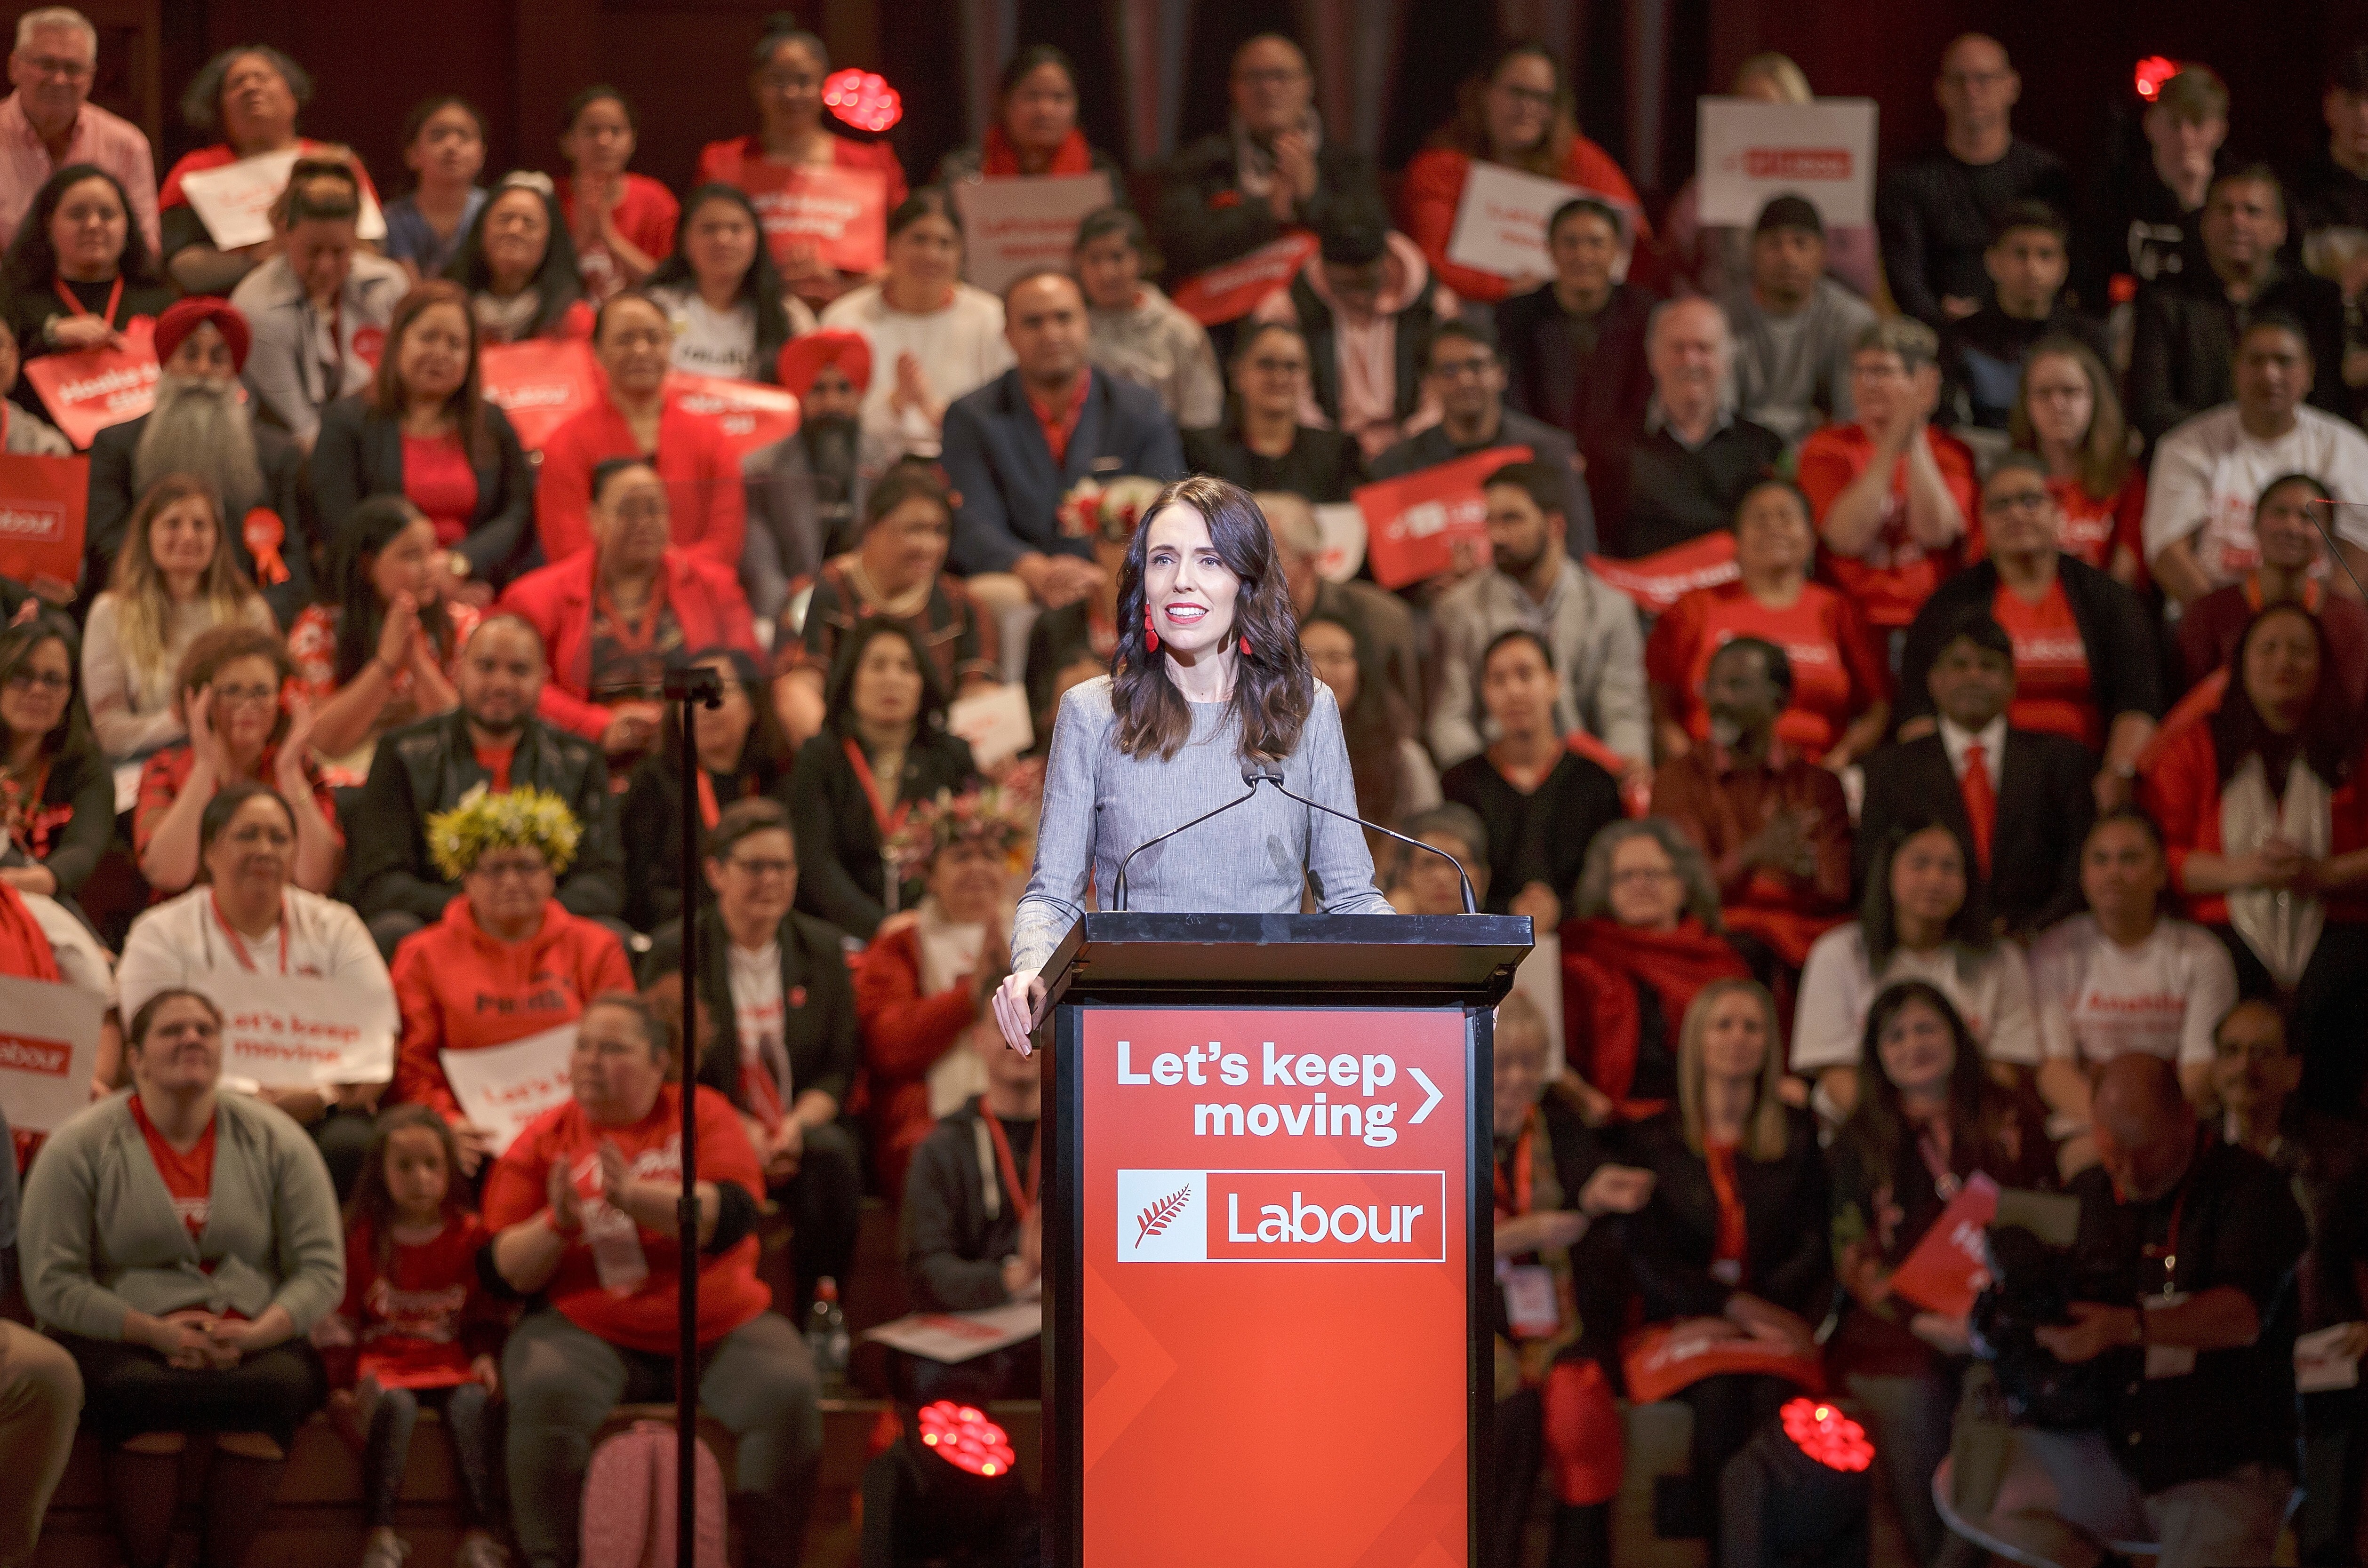 New Zealand Prime Minister Jacinda Ardern speaks at the Labour Party campaign launch in Auckland. Photo: EPA